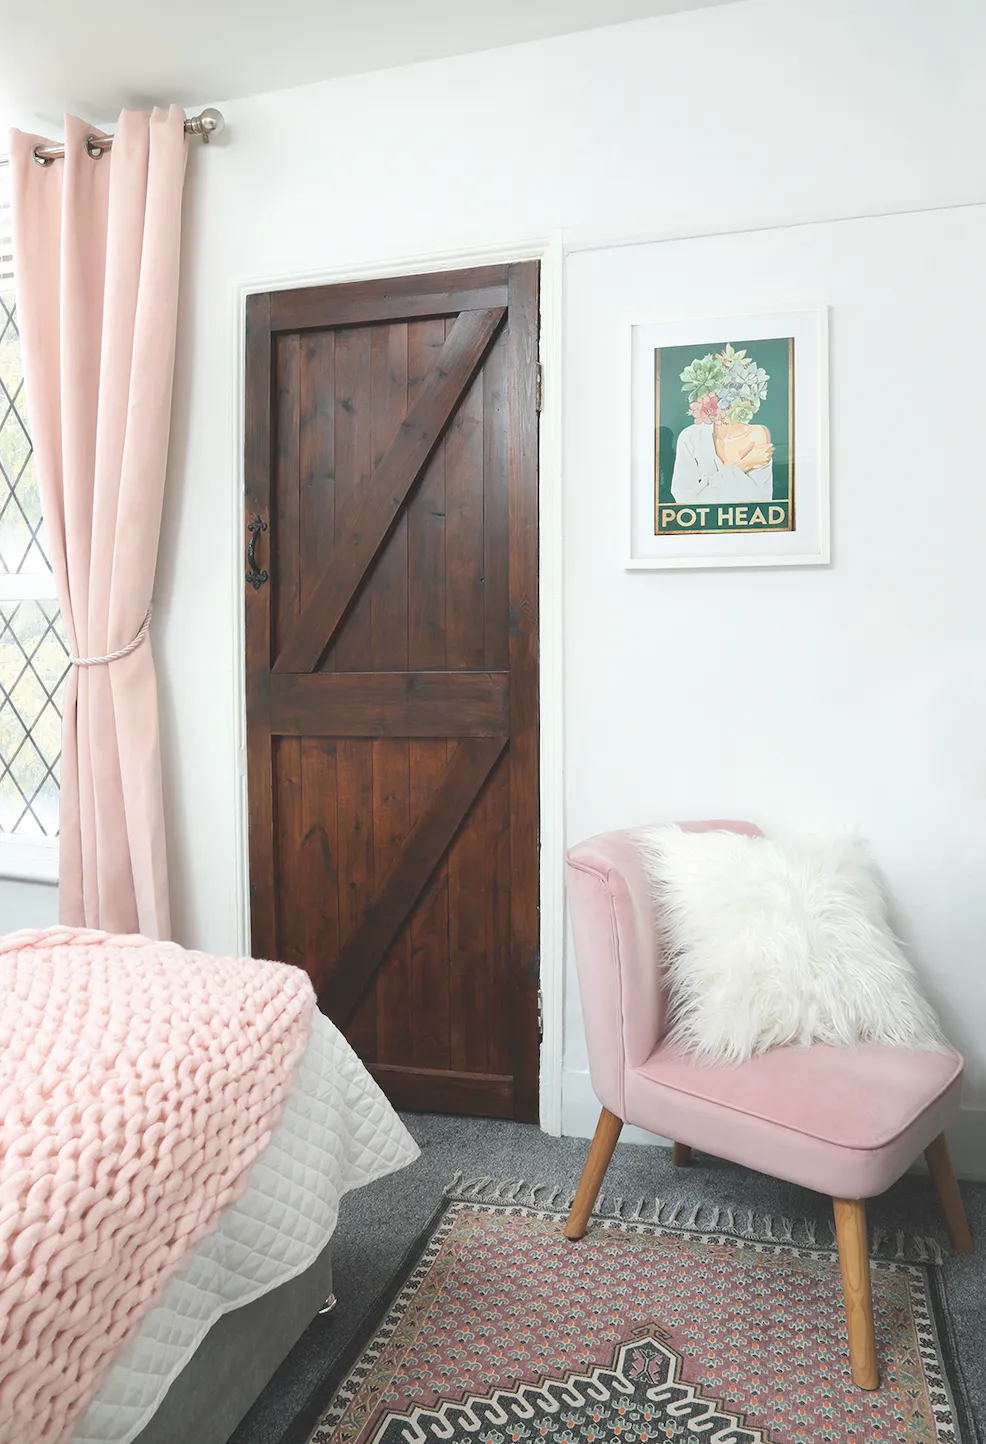 Jo has highlighted the period features in her room by maintaining them with varnish